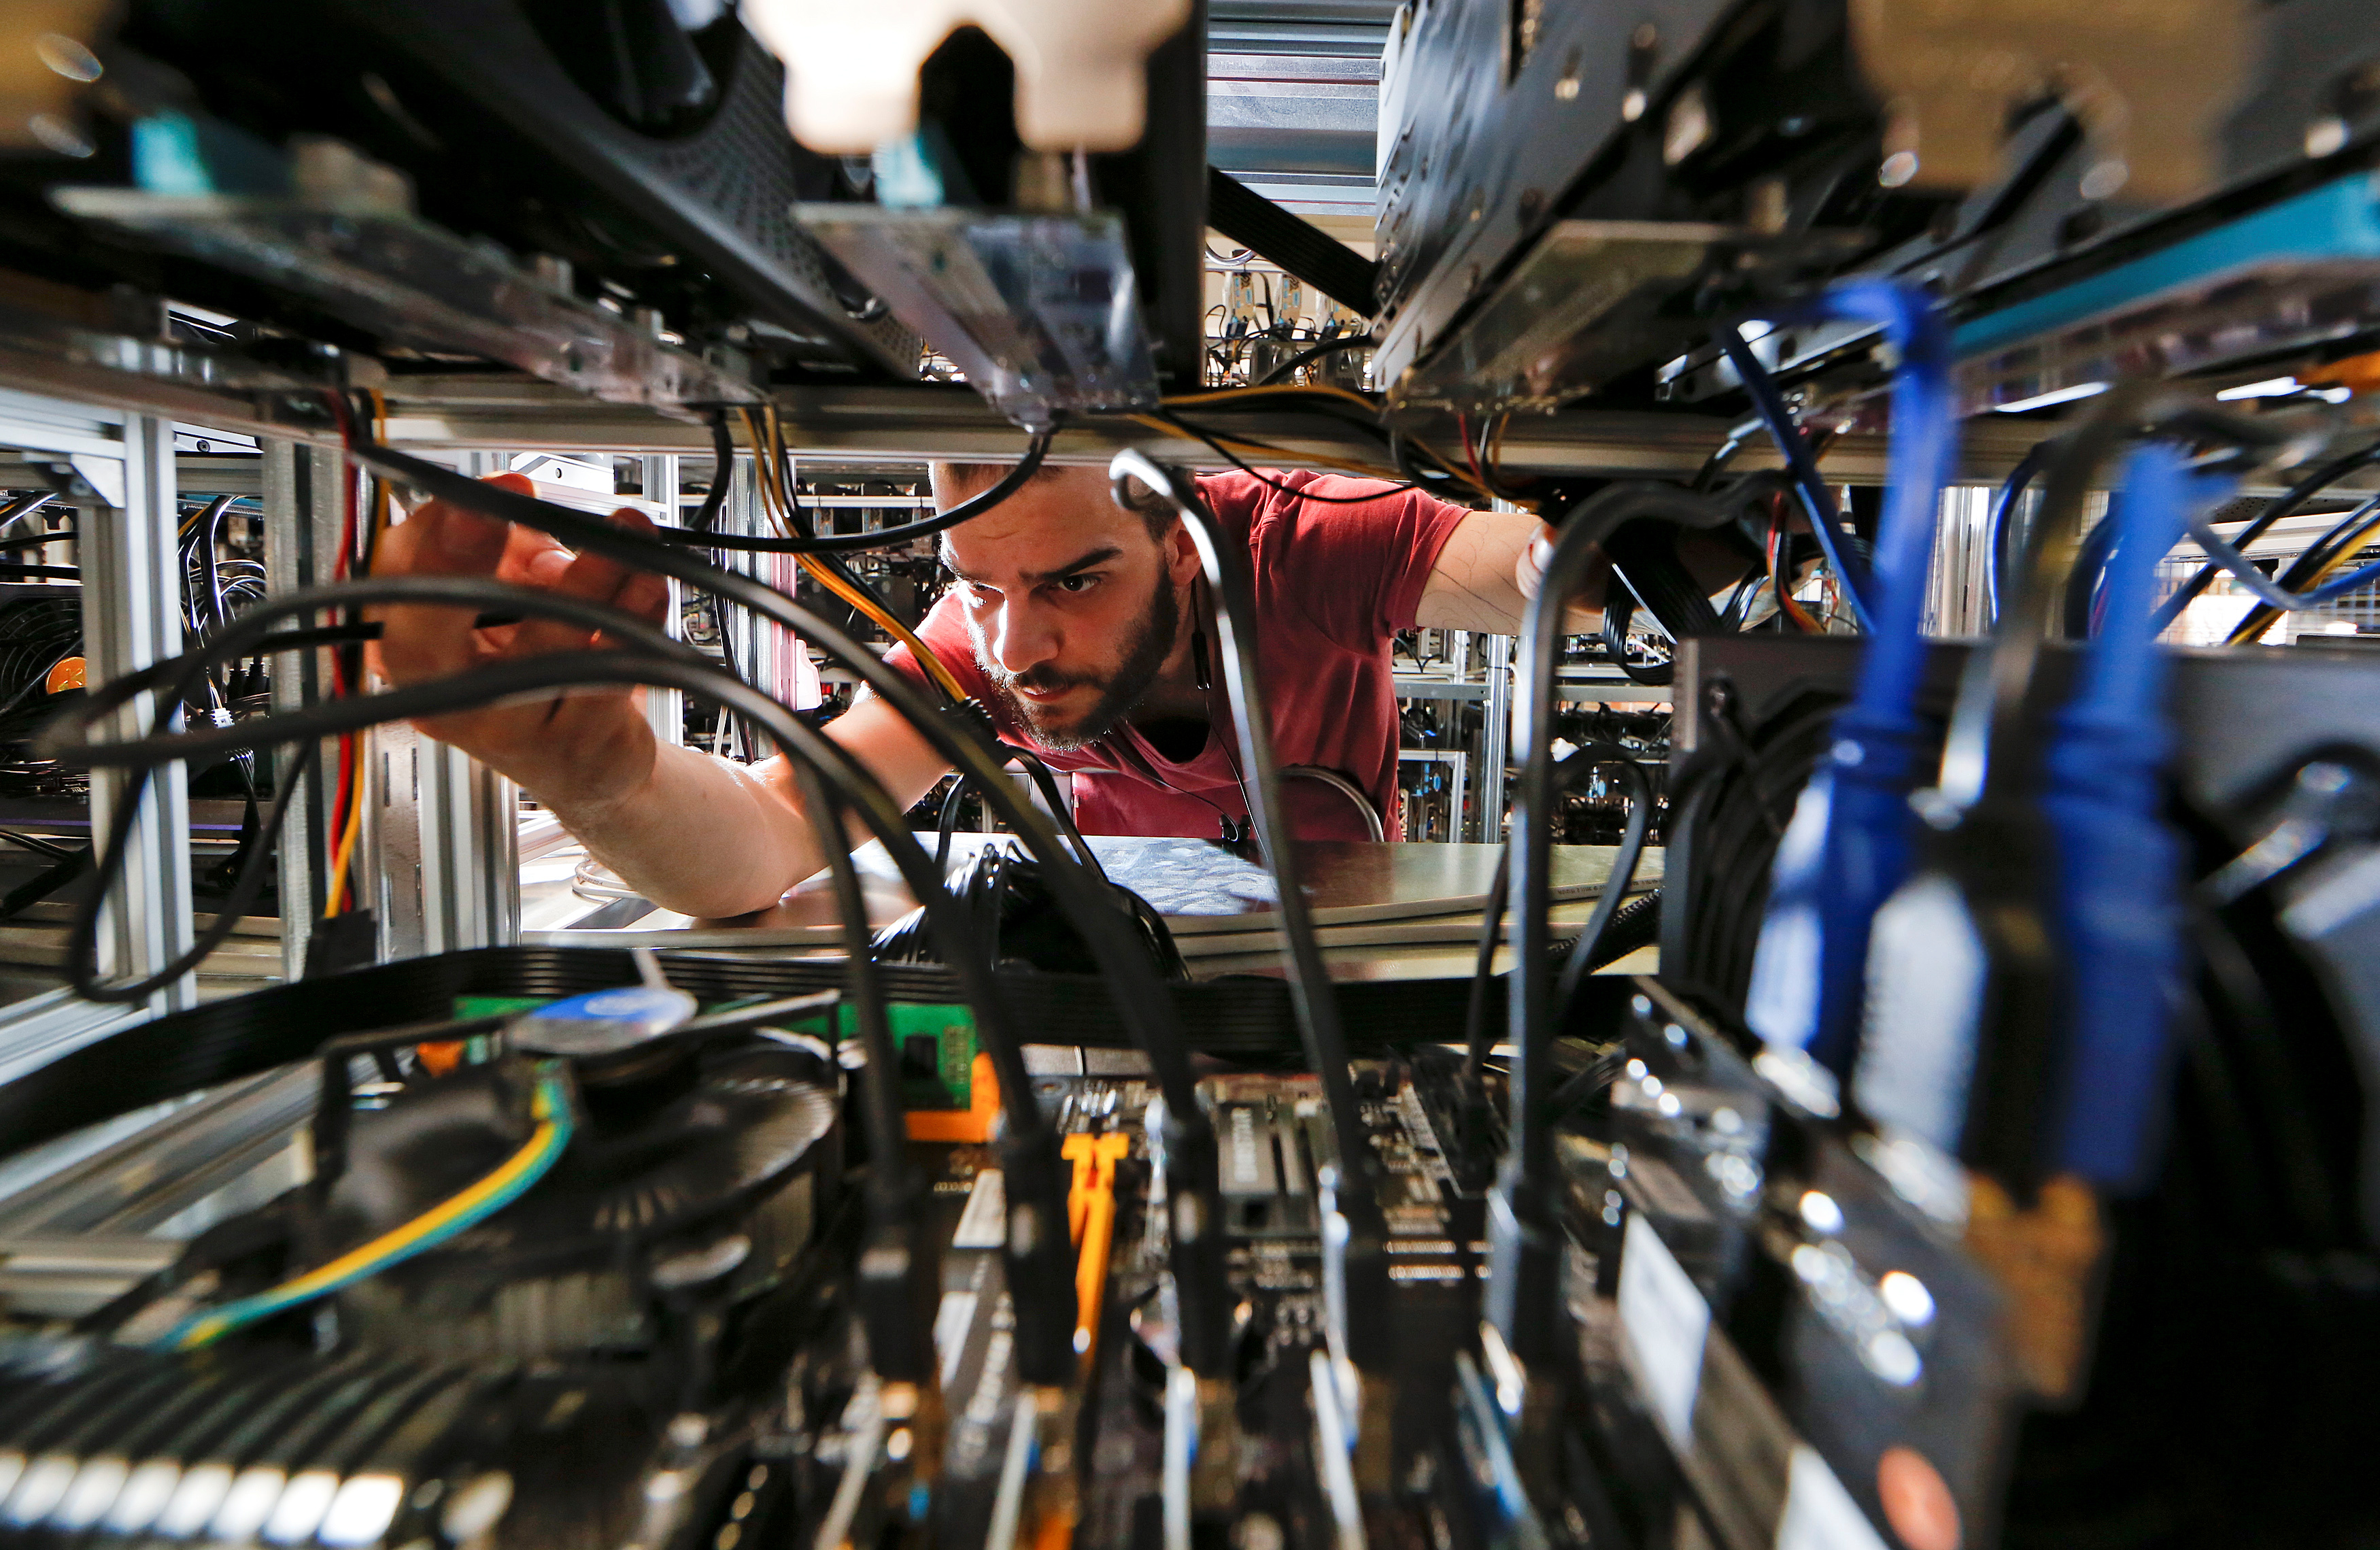 An employee works on bitcoin mining computers at Bitminer factory in Florence, Italy, April 9, 2018. Picture taken April 9, 2018. REUTERS/Alessandro Bianchi - RC1331747750